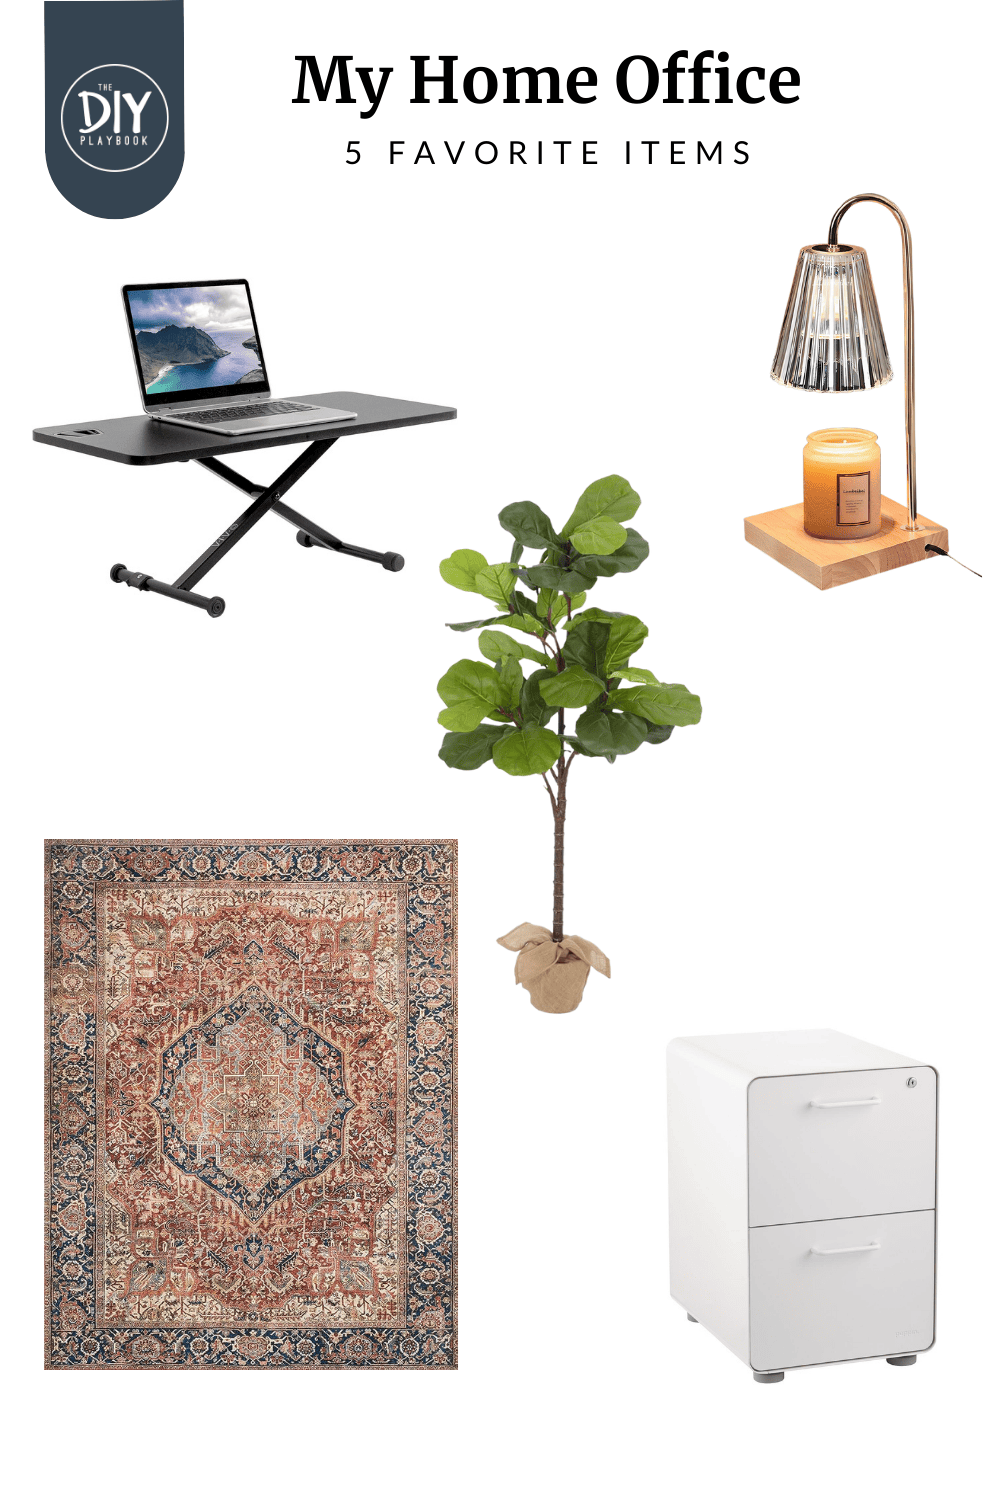 5 cozy home decor ideas for your home office